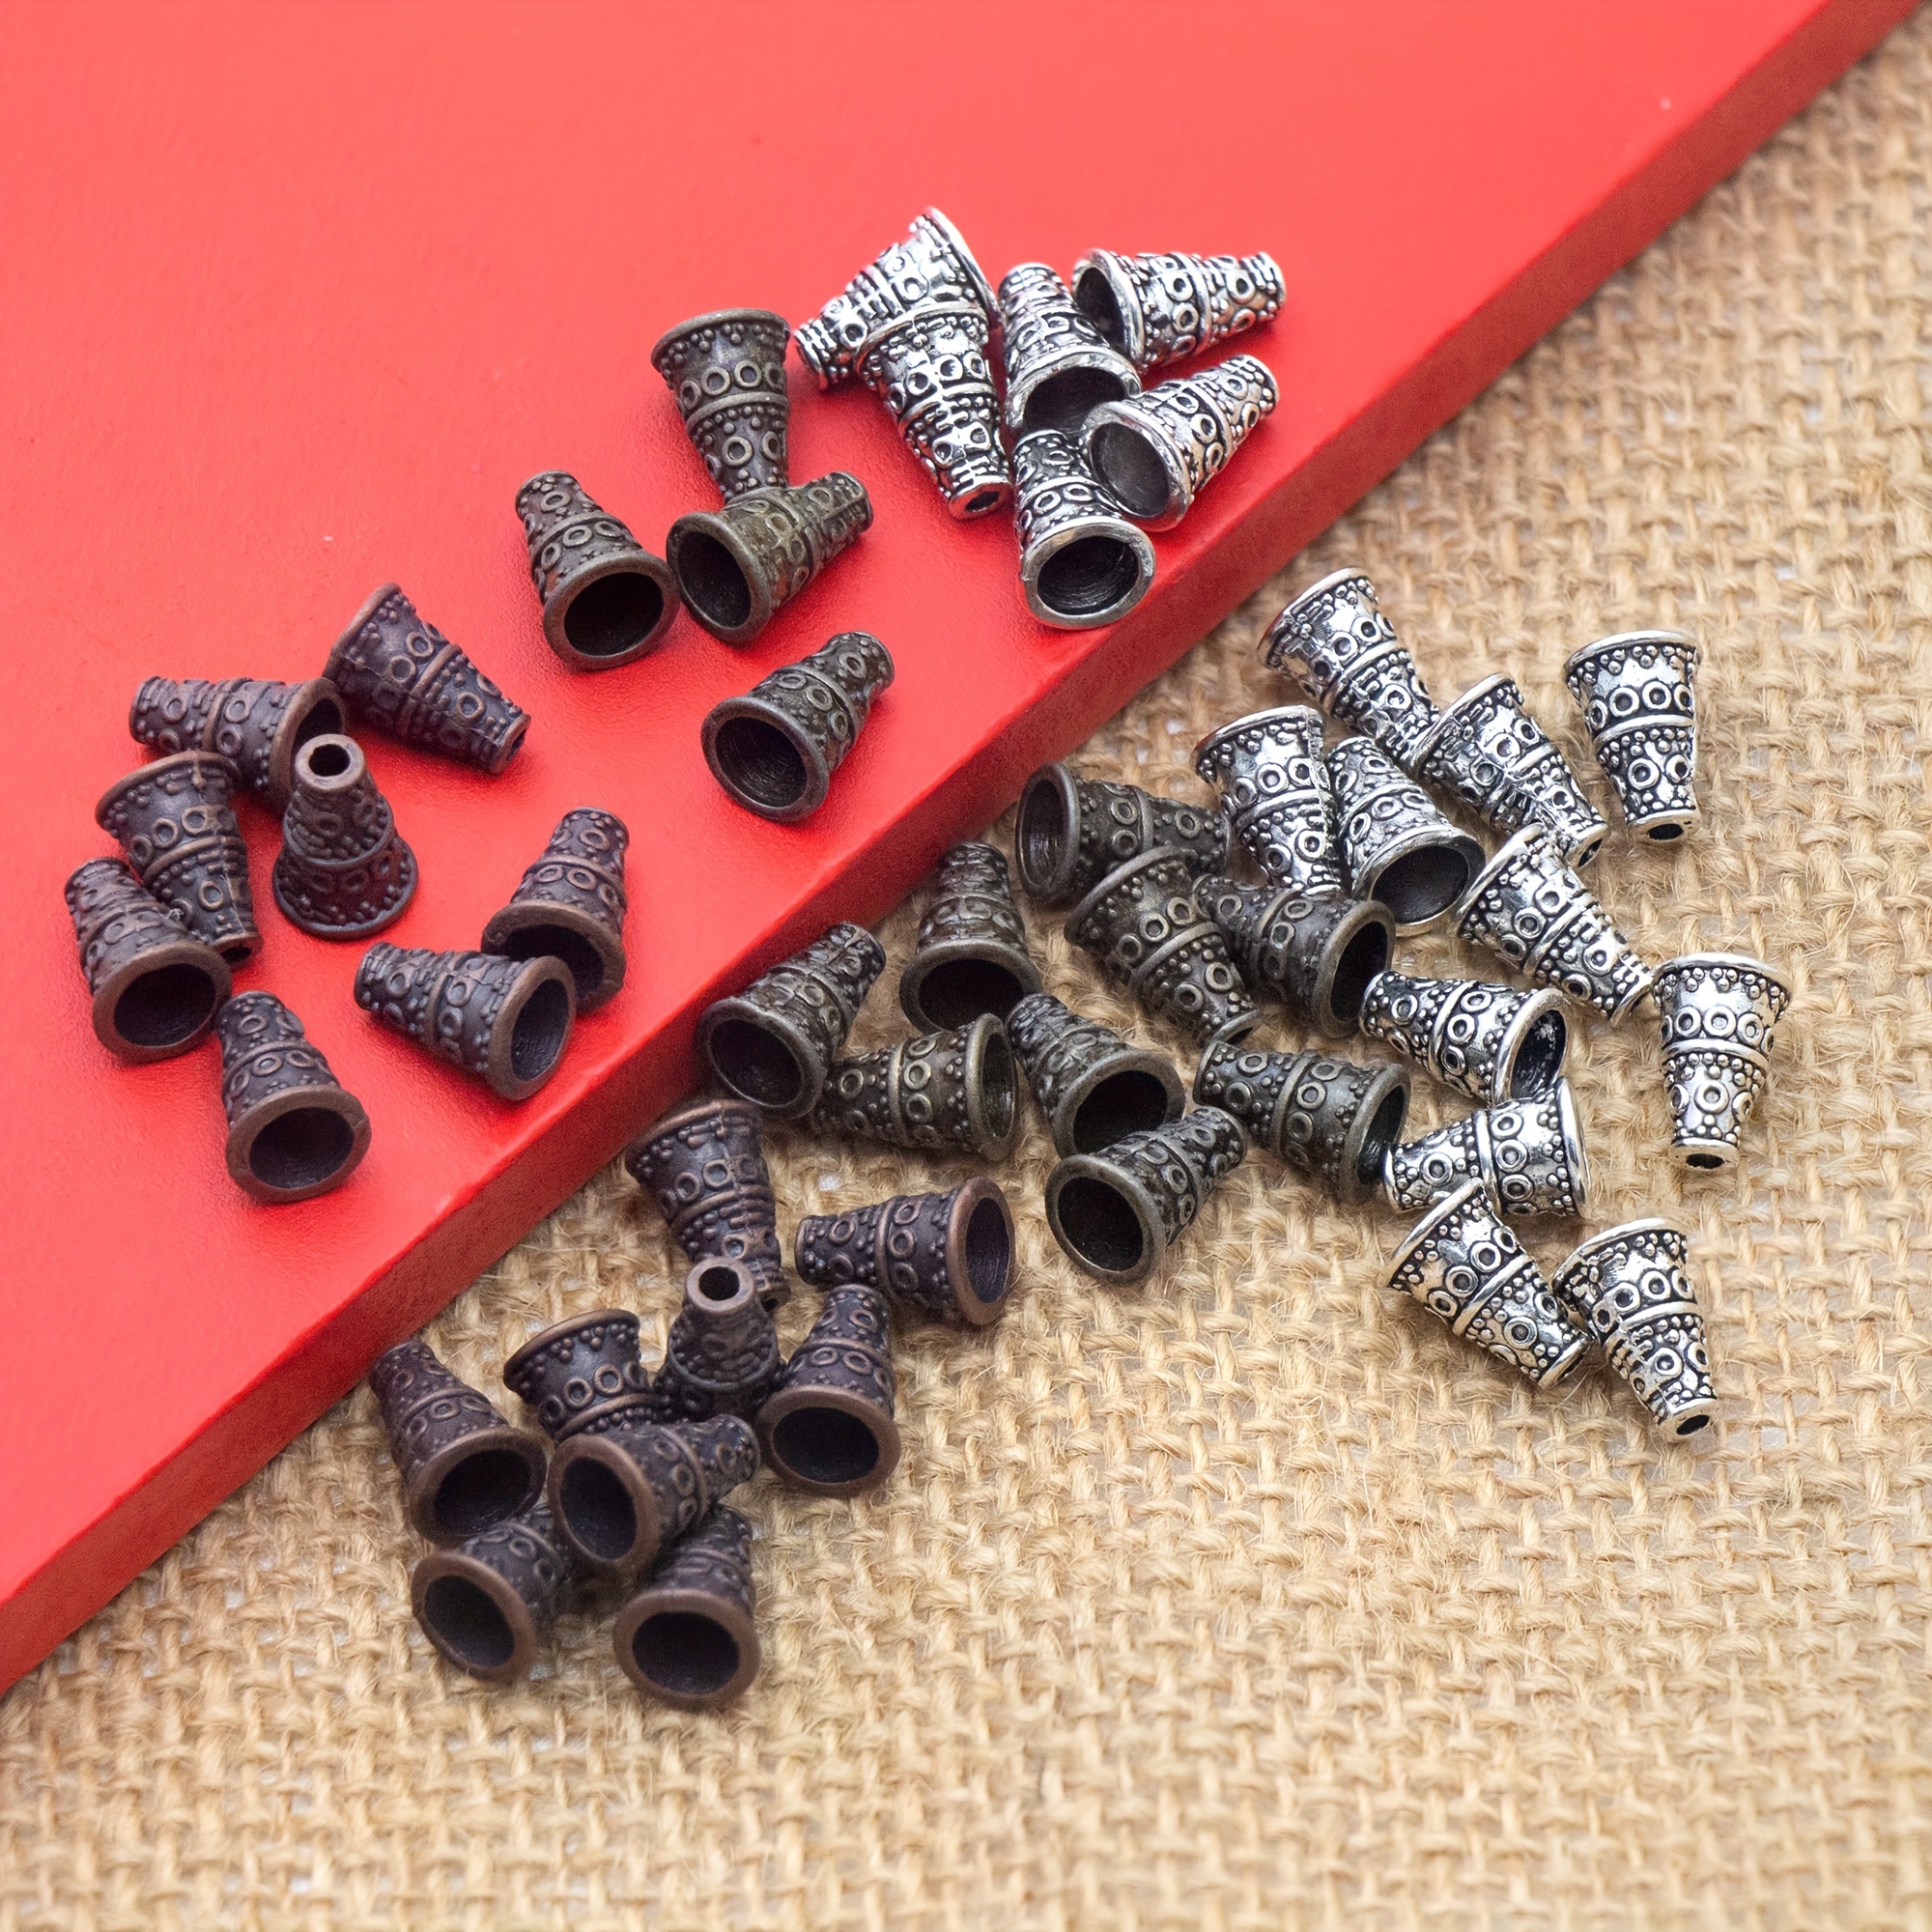 Metal Curtain Hooks - Silver - 50pcs - Beads And Beading Supplies from The  Bead Shop Ltd UK